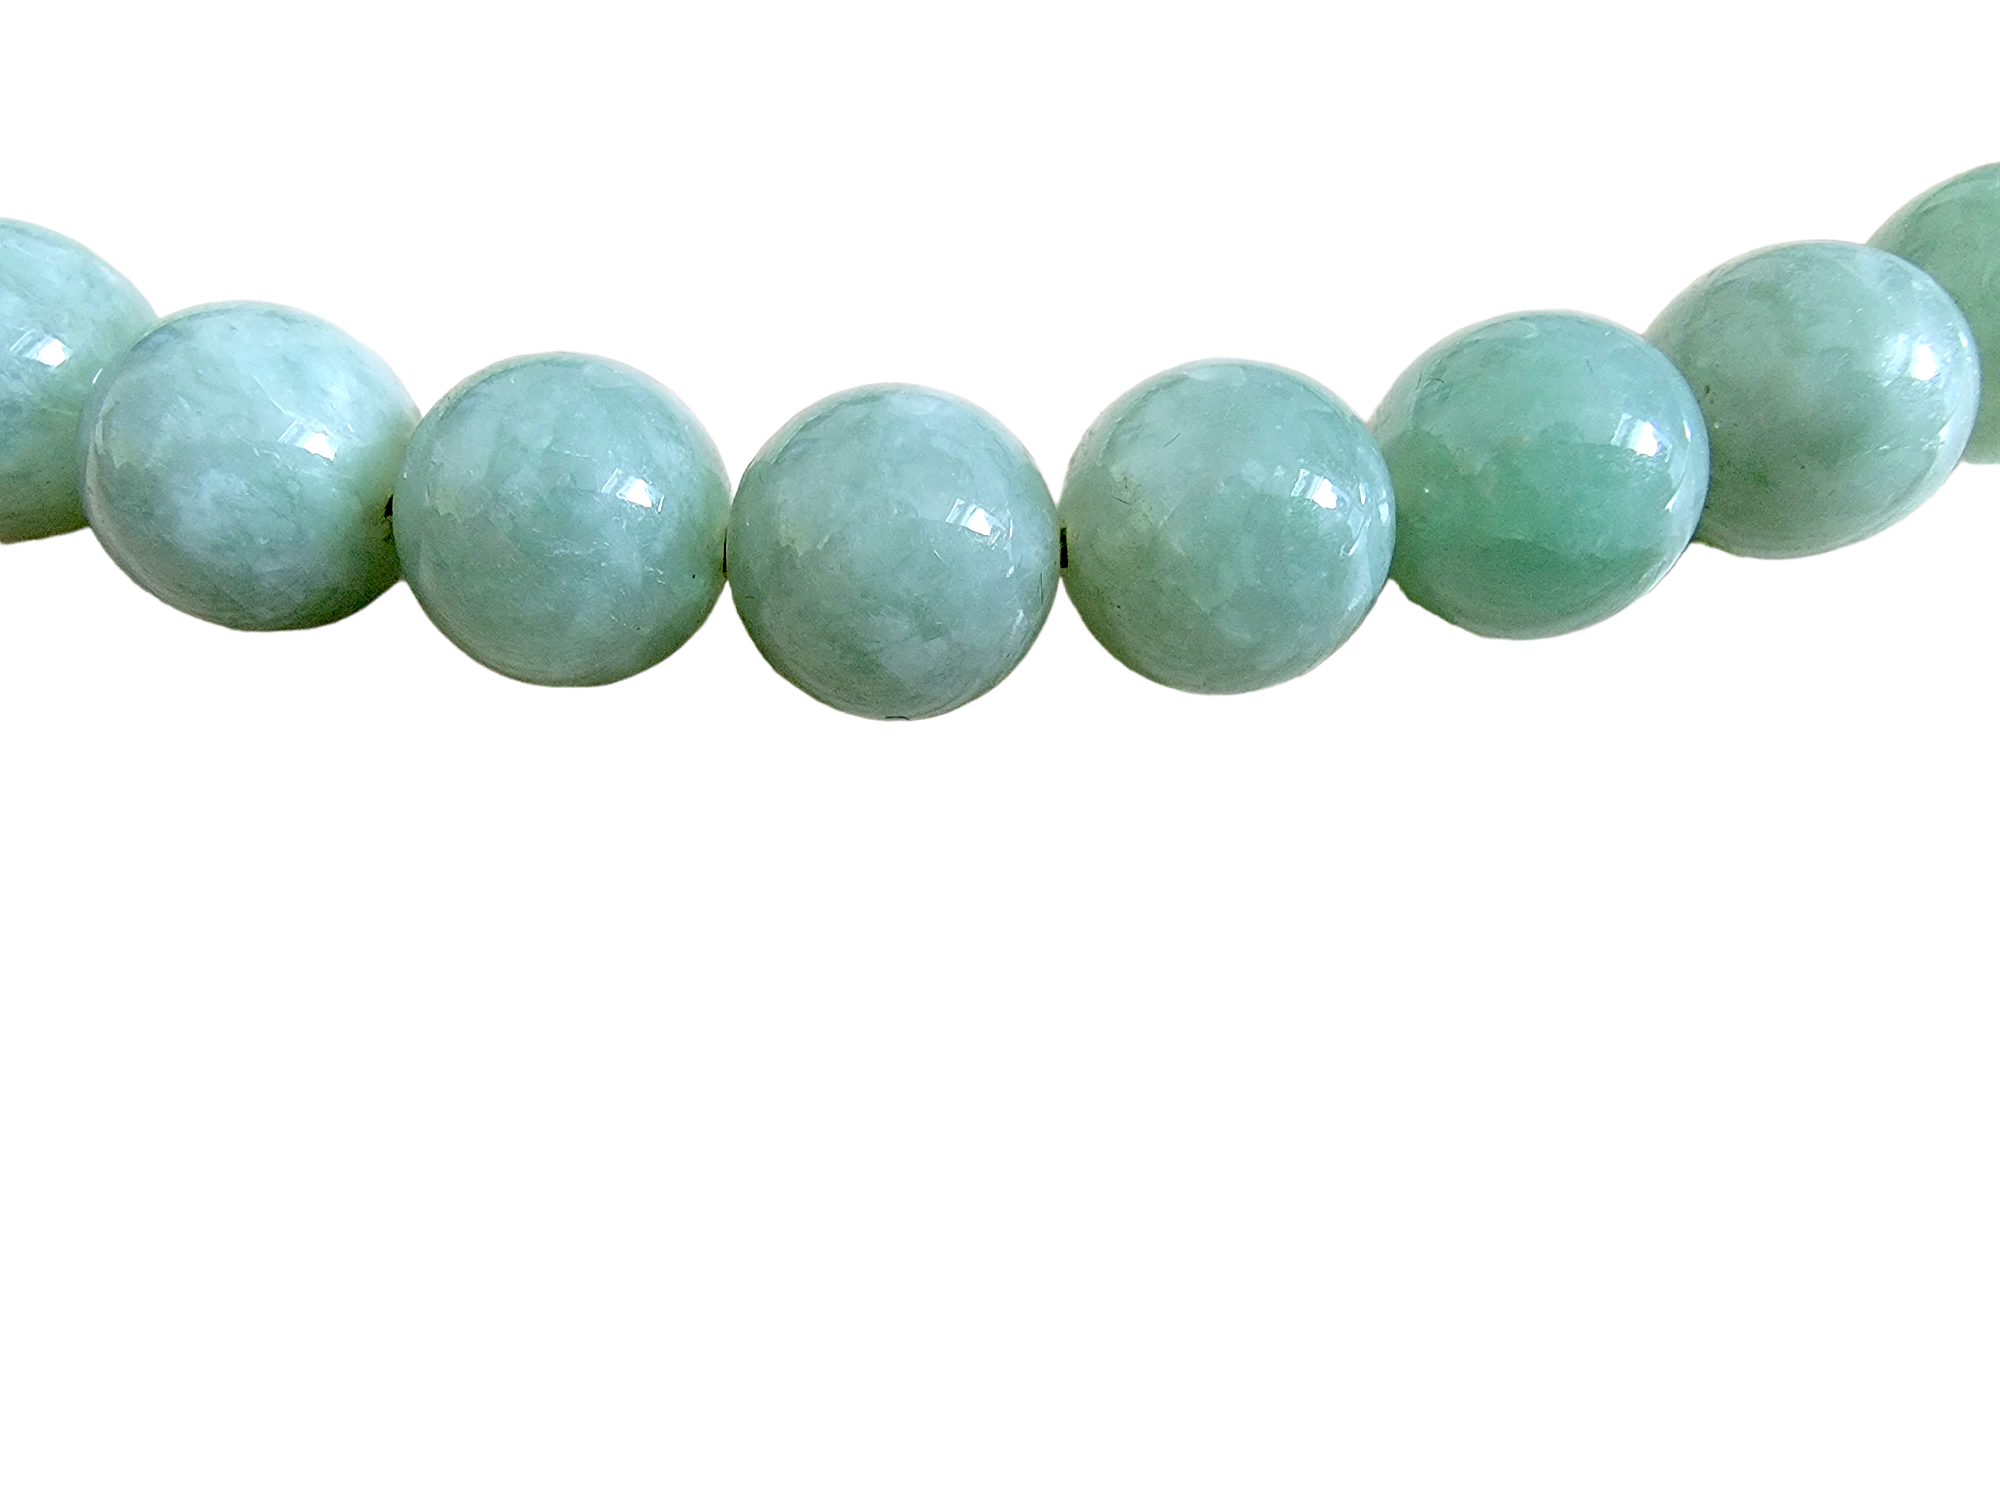 18 Imperial Green Quartz / Malaysia Jade 14mm Beads Necklace-D003023